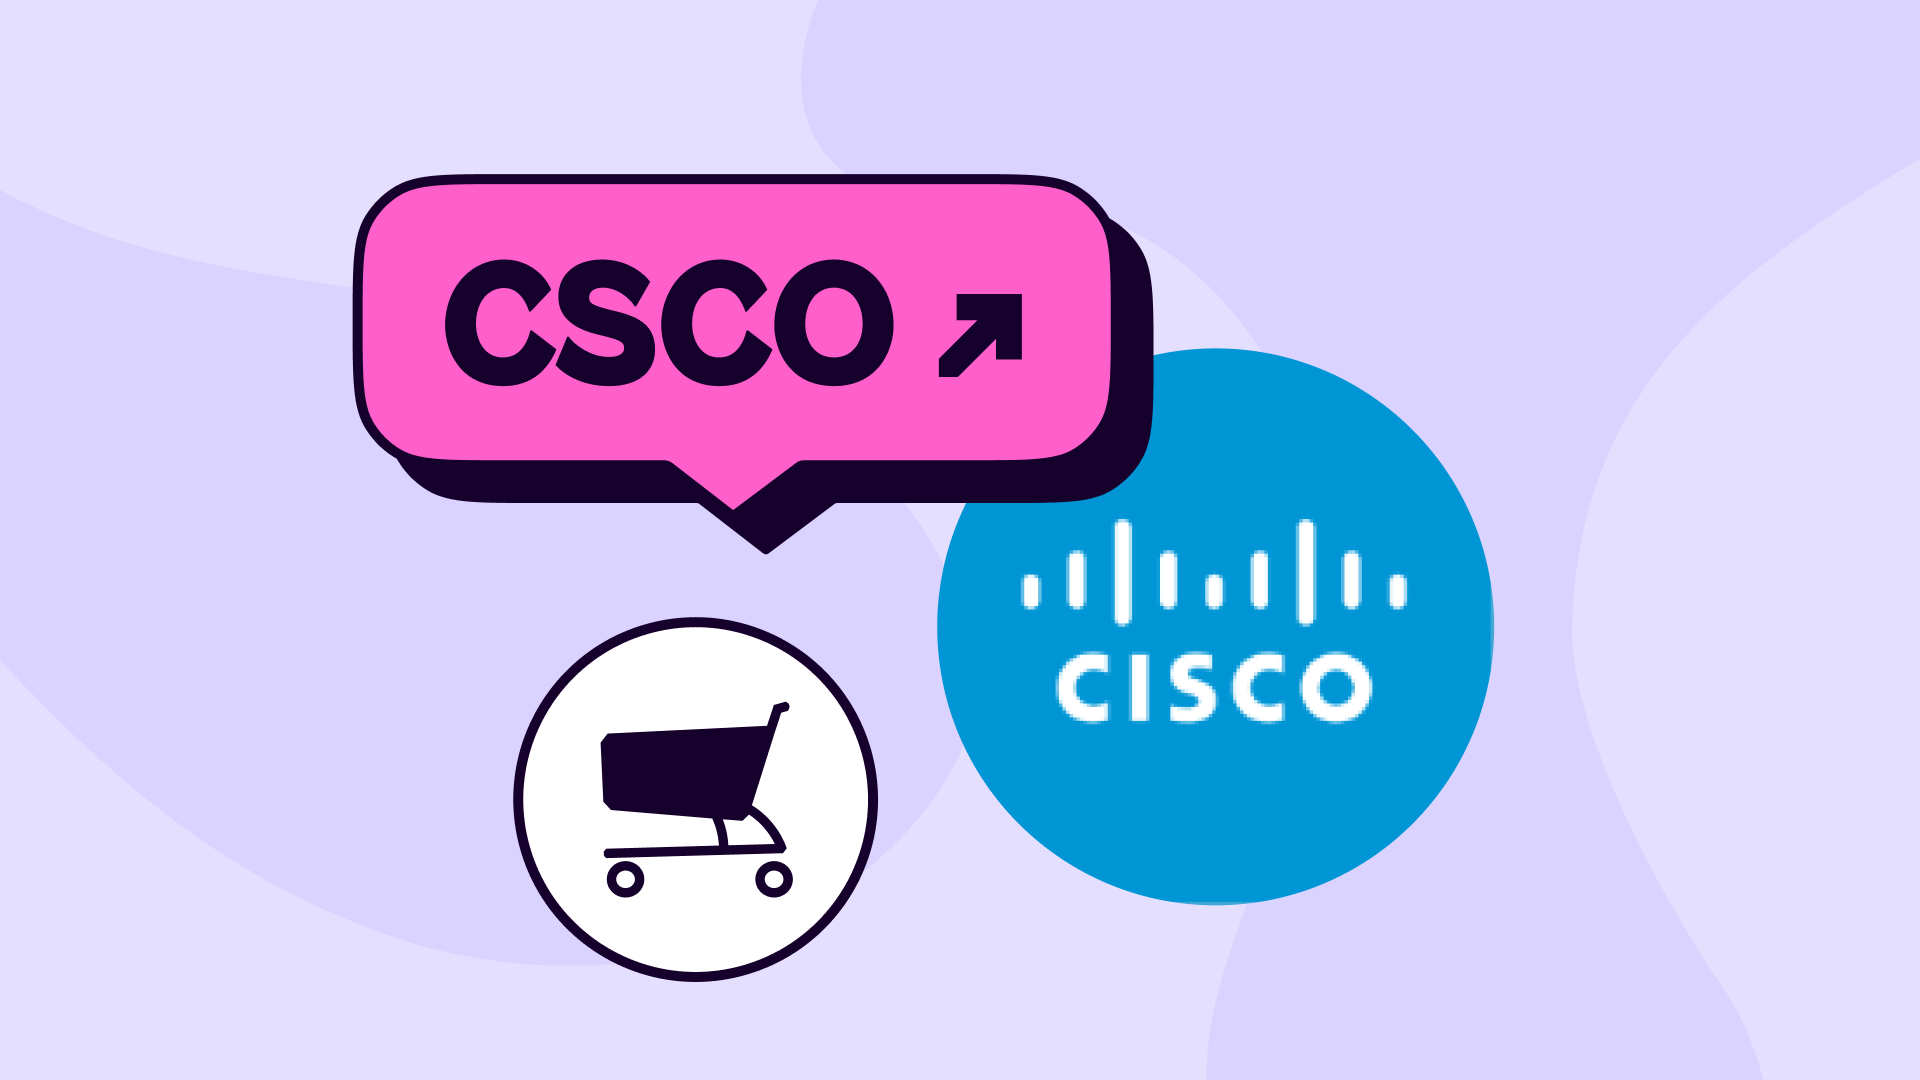 How to buy and sell Cisco shares